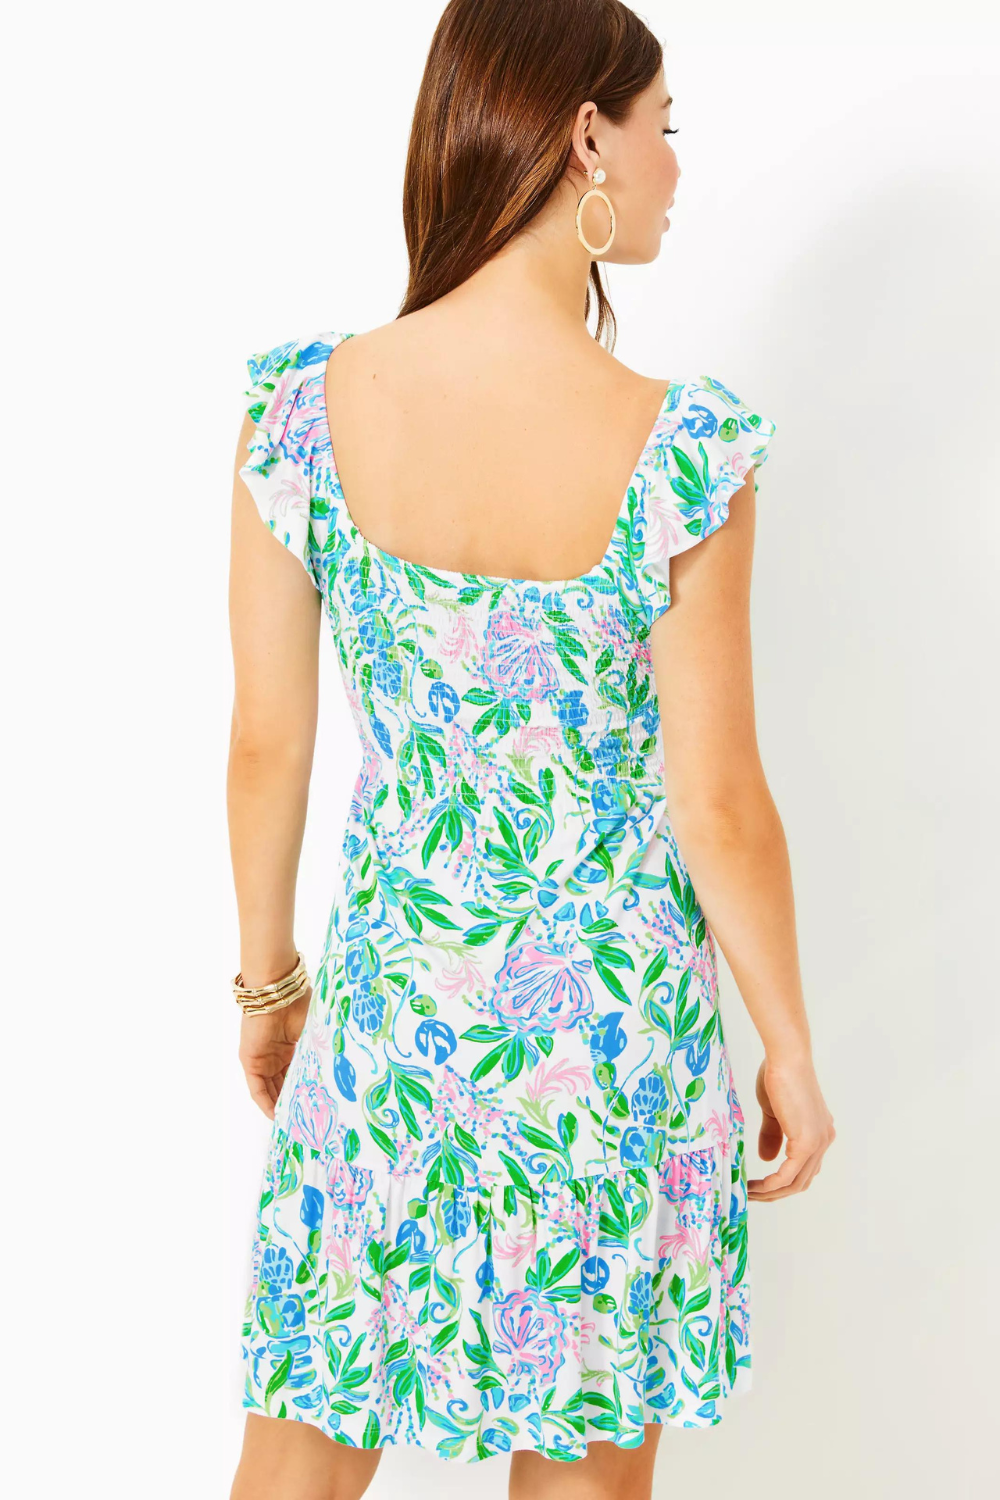 Lilly Pulitzer Jilly Smocked Dress - Just a Pinch